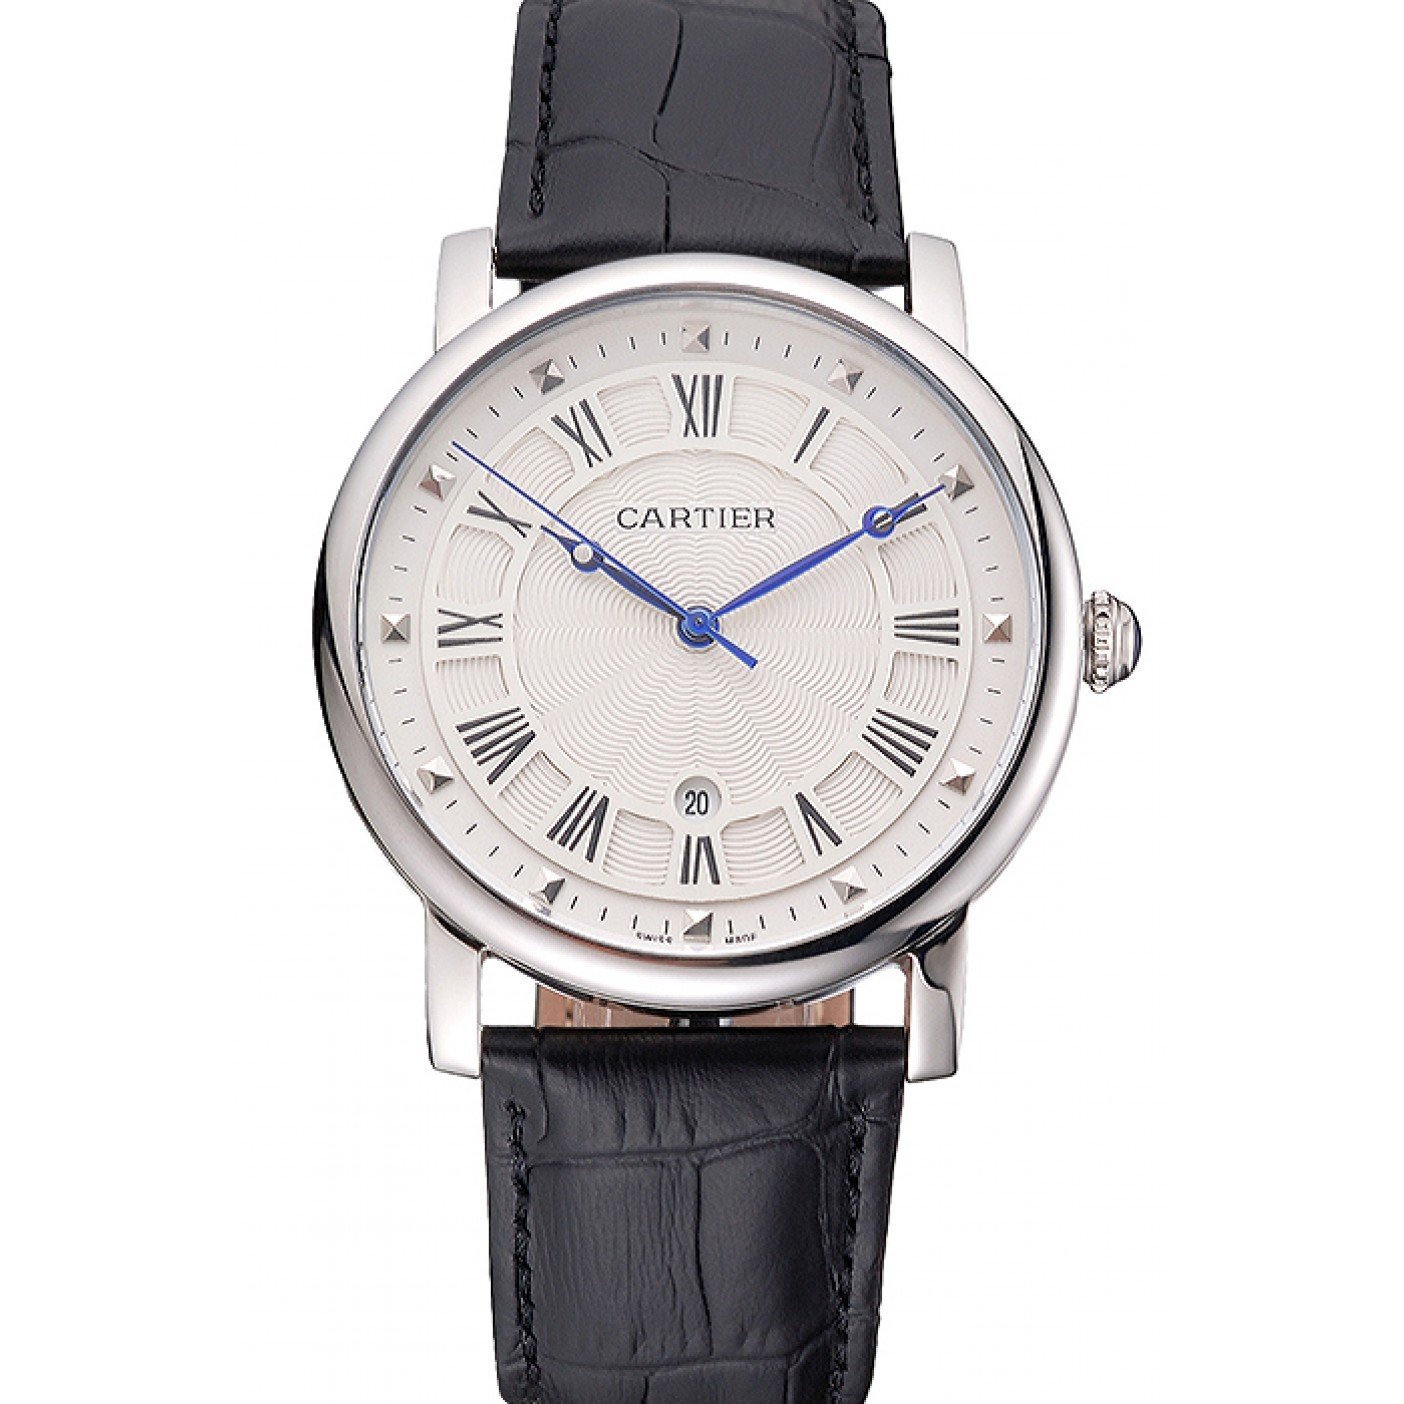 Cartier Rotonde Date White Dial Stainless Steel Case Black Leather Strap